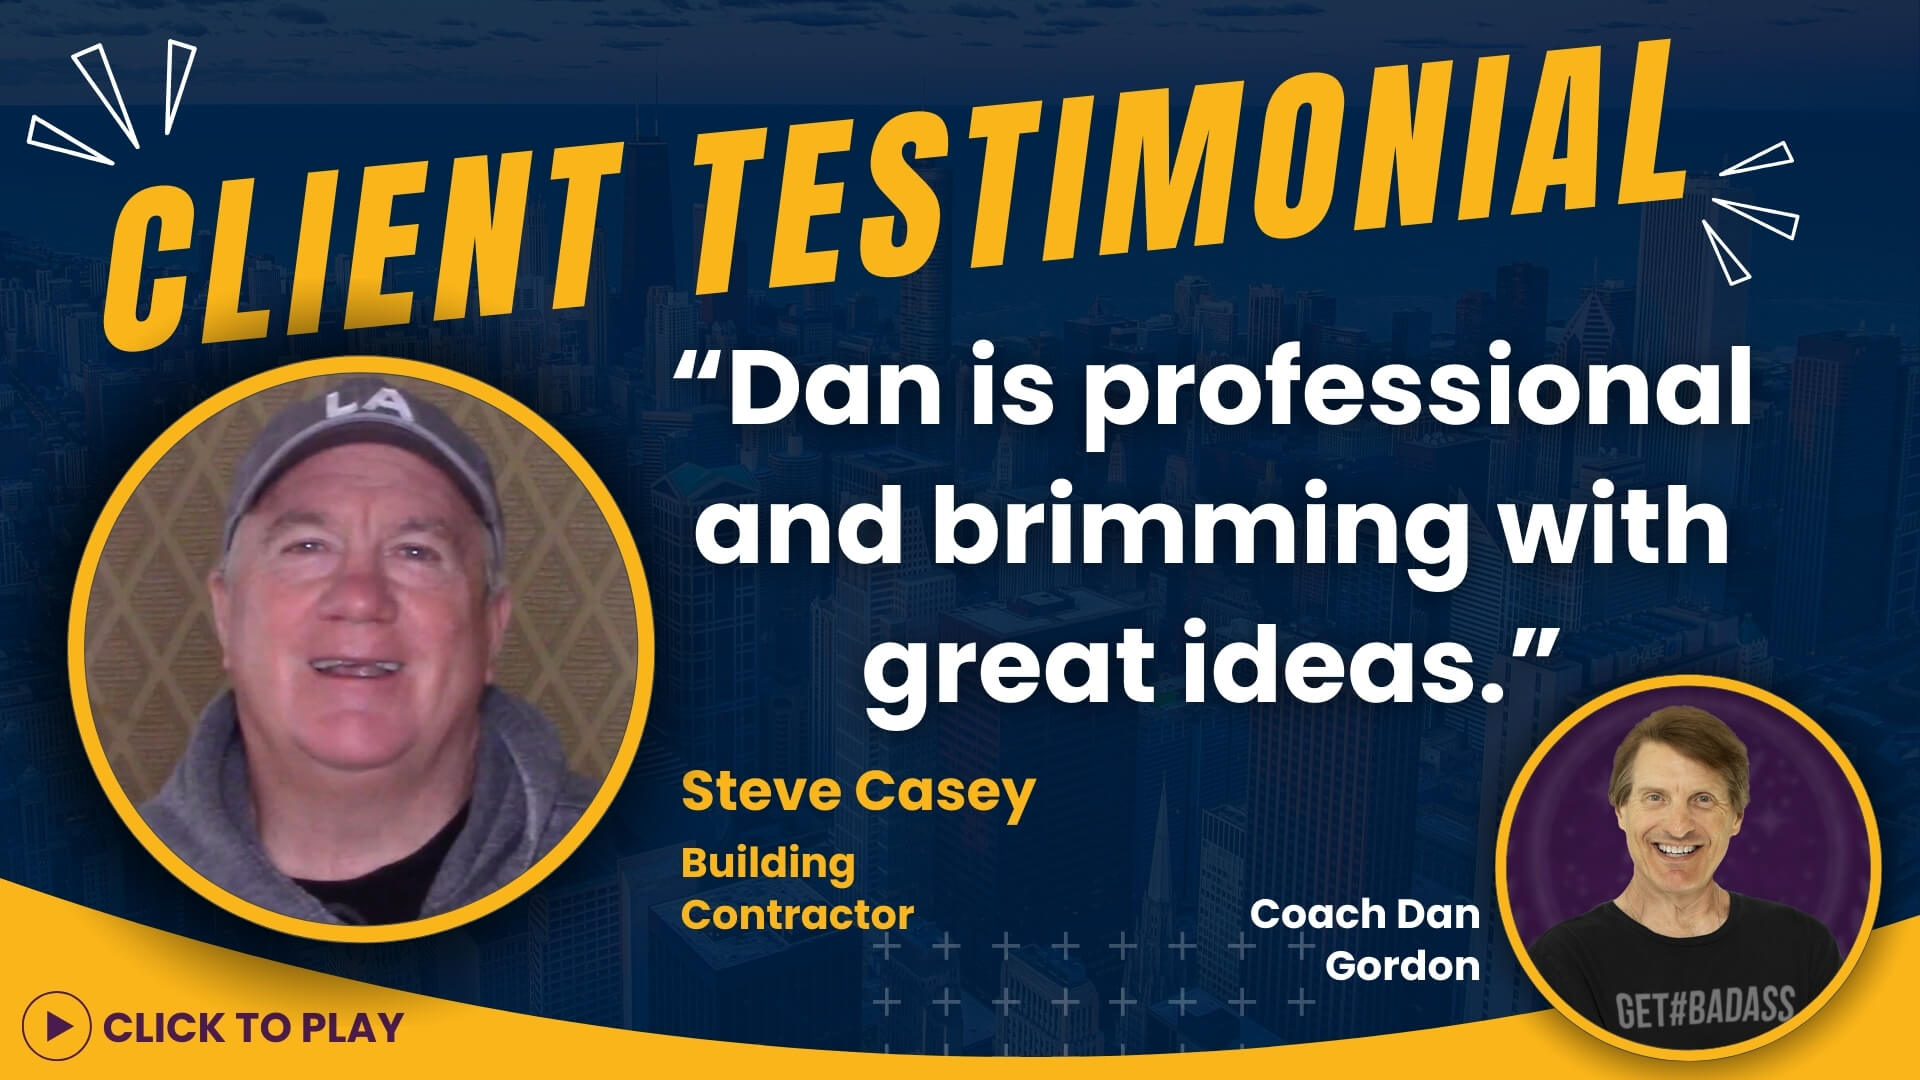 Steve Casey, Building Contractor, giving a testimonial with a quote about Coach Dan Gordon's professionalism and creativity.